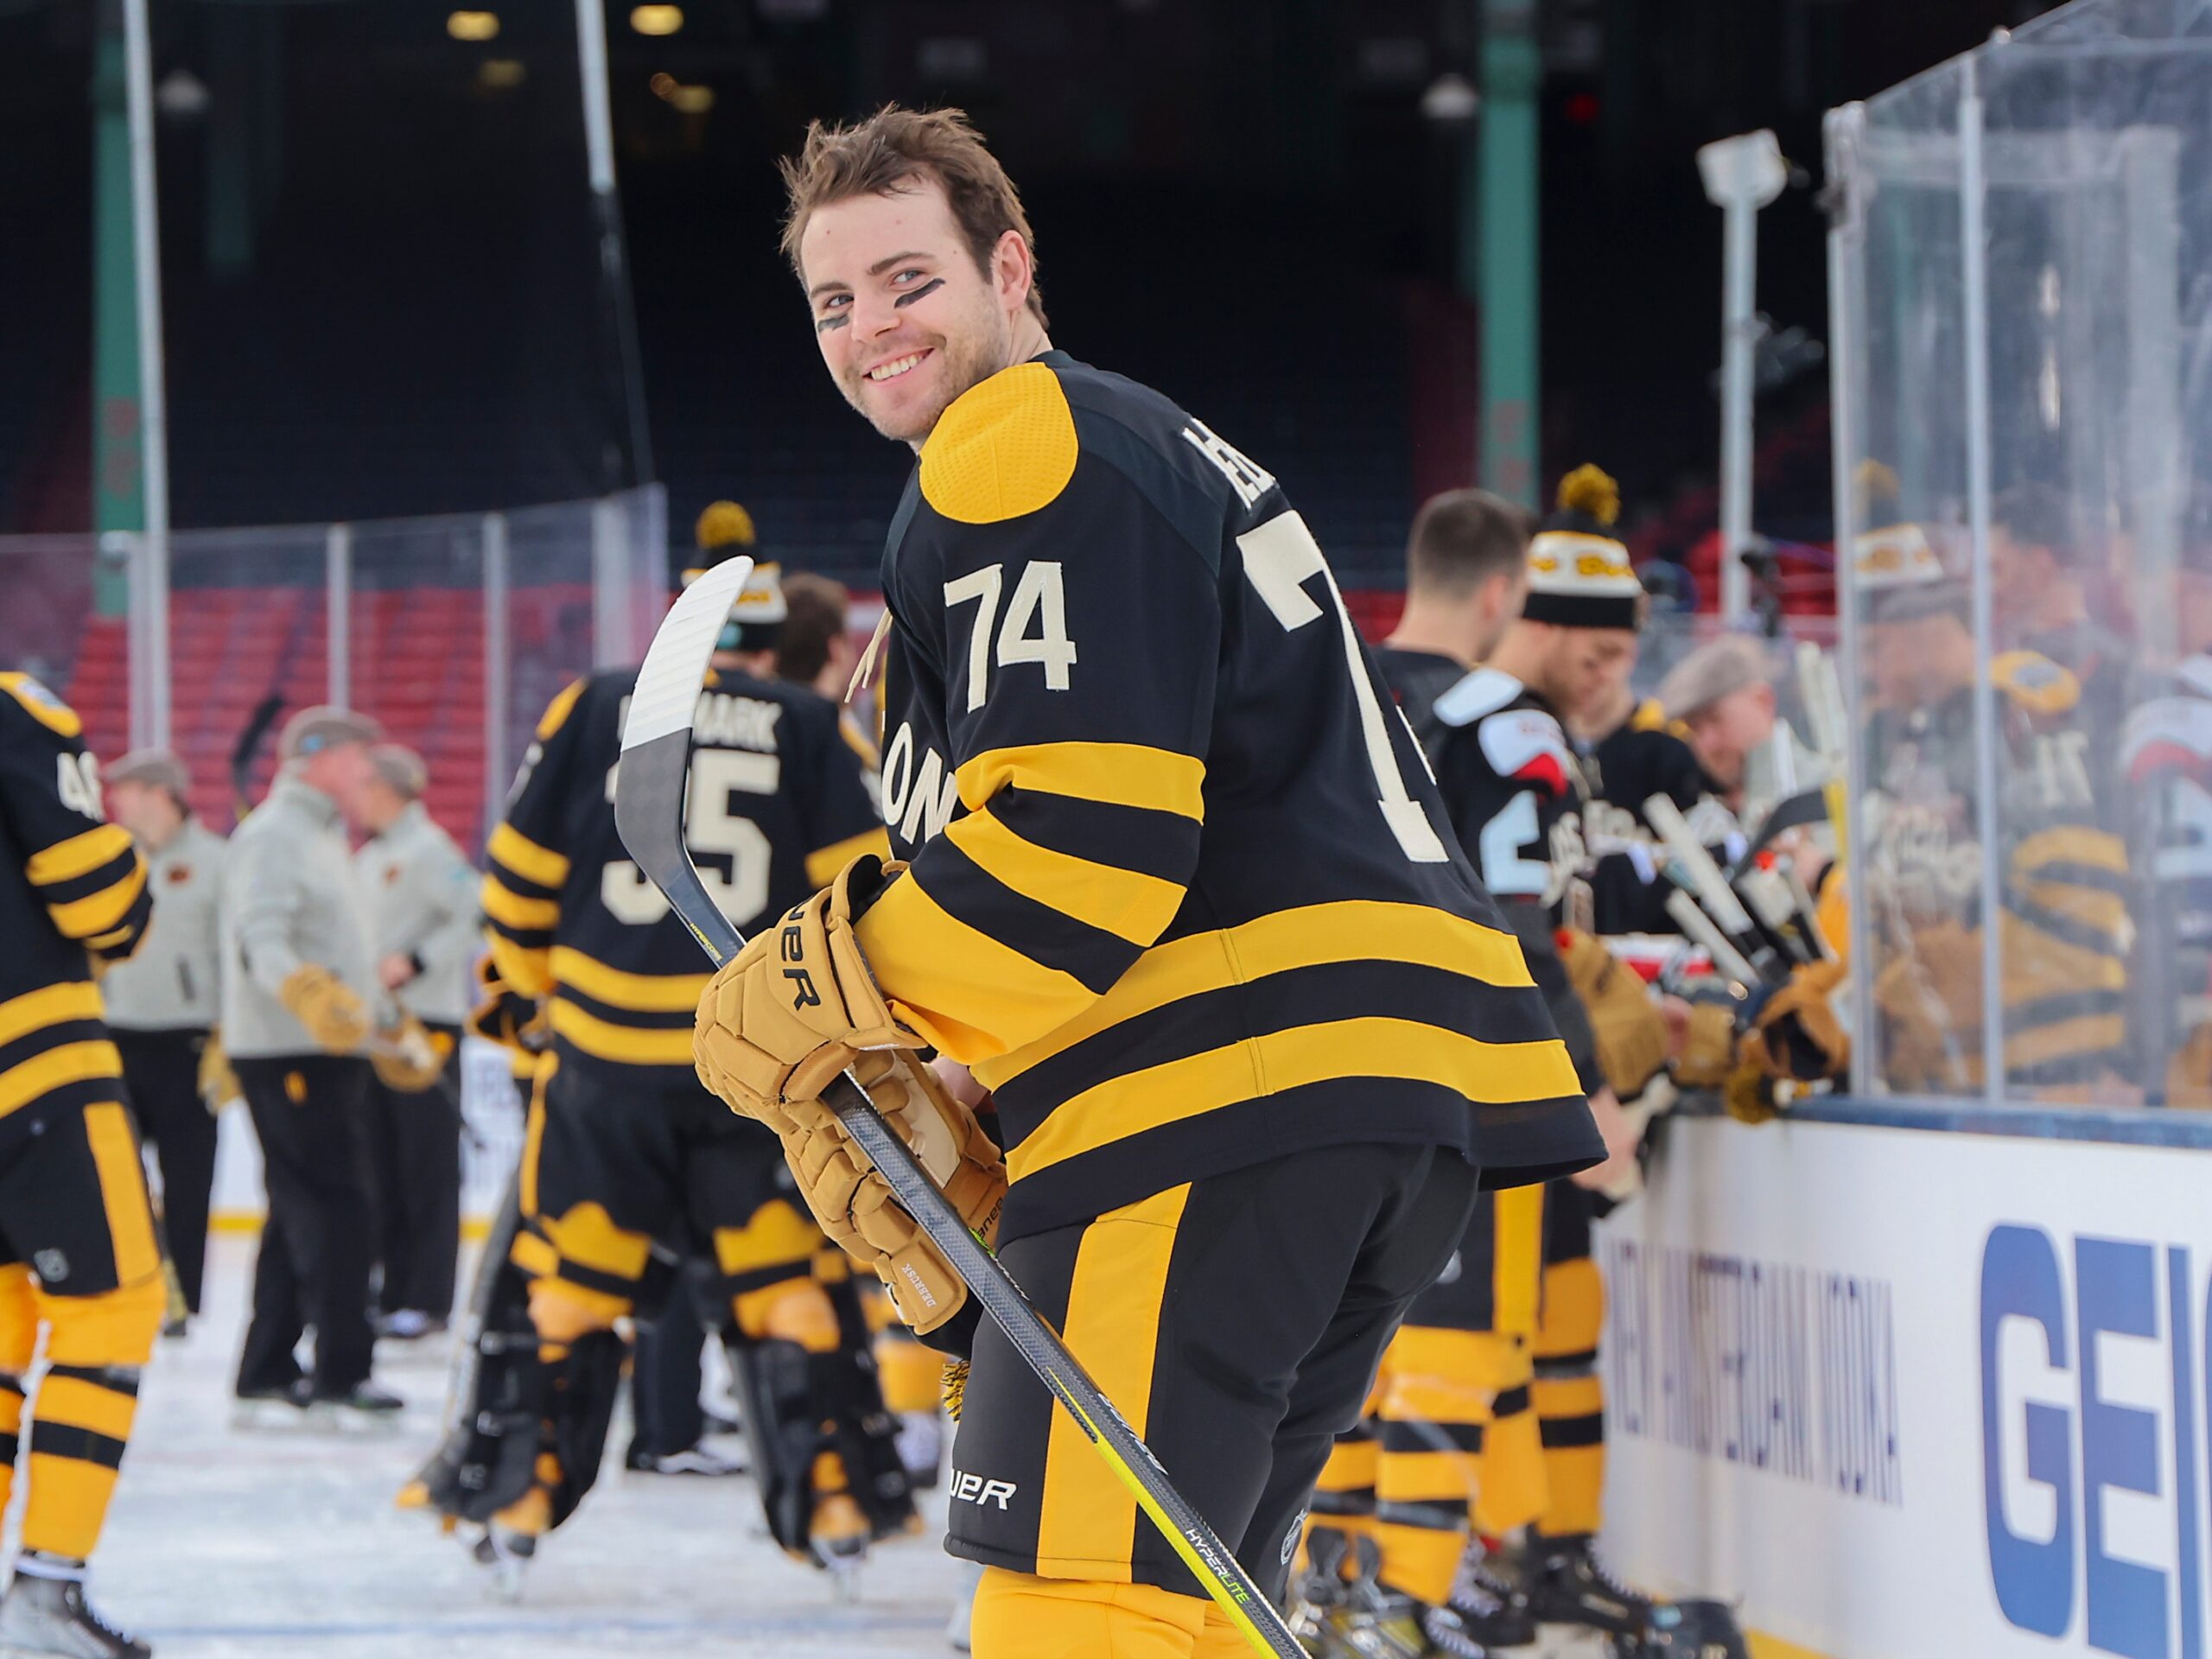 Boston Bruins Jake DeBrusk during practice before they play the Pittsburgh Penguins in tomorrow's Winter Classic at Fenway Park.